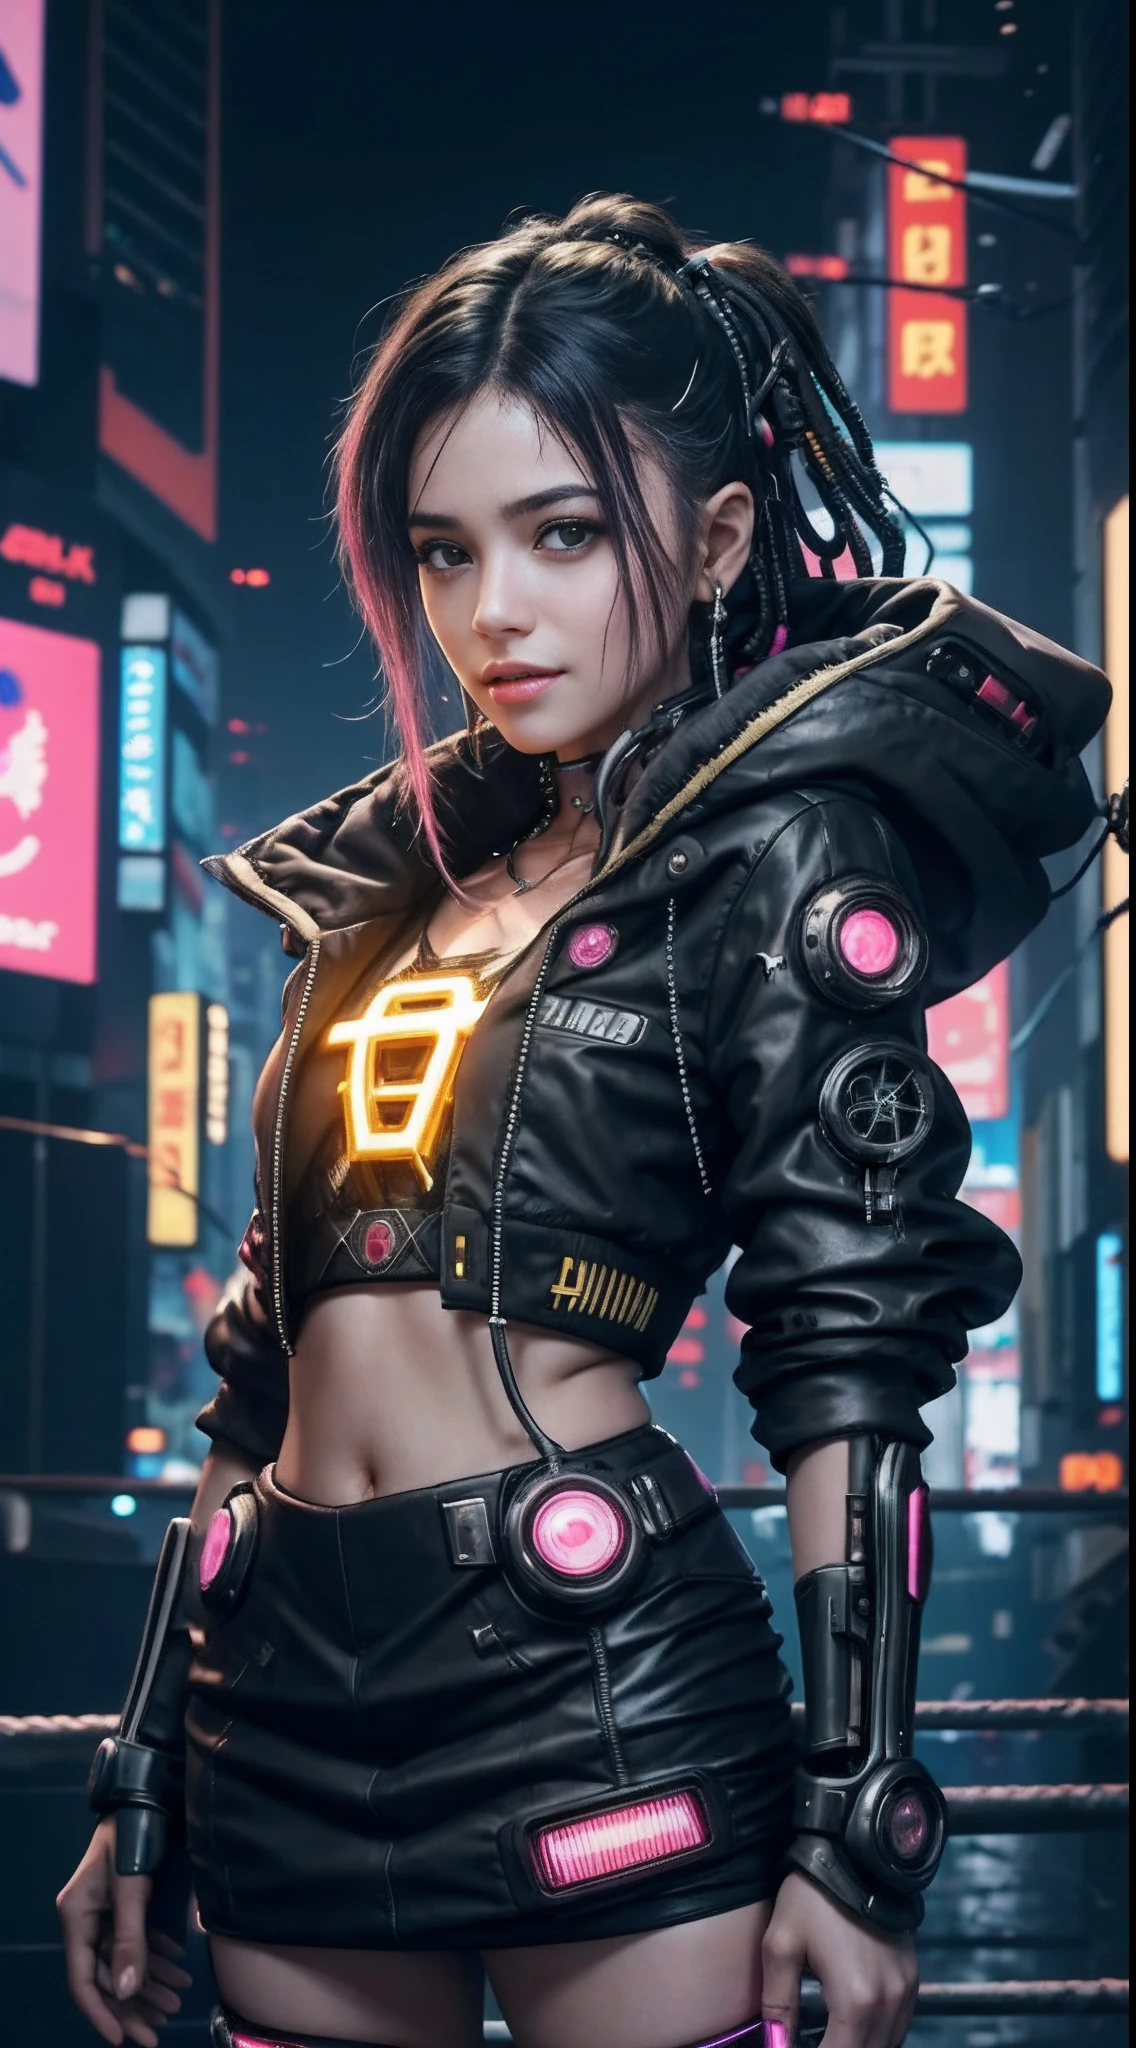 unreal engine:1.4,UHD,The best quality:1.4, photorealistic:1.4, skin texture:1.4, Masterpiece:1.8, 1 chica Cyberpunk, black hair, shiny skin, 1 Yellow Mechanical Girl, (Super realistic details)), whole body, global ilumination, contrast, In the shade, octane rendering, ultrasharp, exposed cleavage, raw skin,miniskirt yellow, Metal,Intricate yellow decoration details, Japan details, Highly detailed intricate, realistic light, Trends in CG, in front of camera, neon details, mechanical limbs, Blood Vessels Attached to Tubes, Mechanical vertebrae attached to the back, mechanical cervical attachment to the neck, wires and cables that connect to the head, Gundam, small LED lamps.14 Years Old Girl、silver hair、Perfectly round pupils、Iris tremblingﾃﾞｨﾃｰﾙ, light smile,(Cyberpunk:1.3)